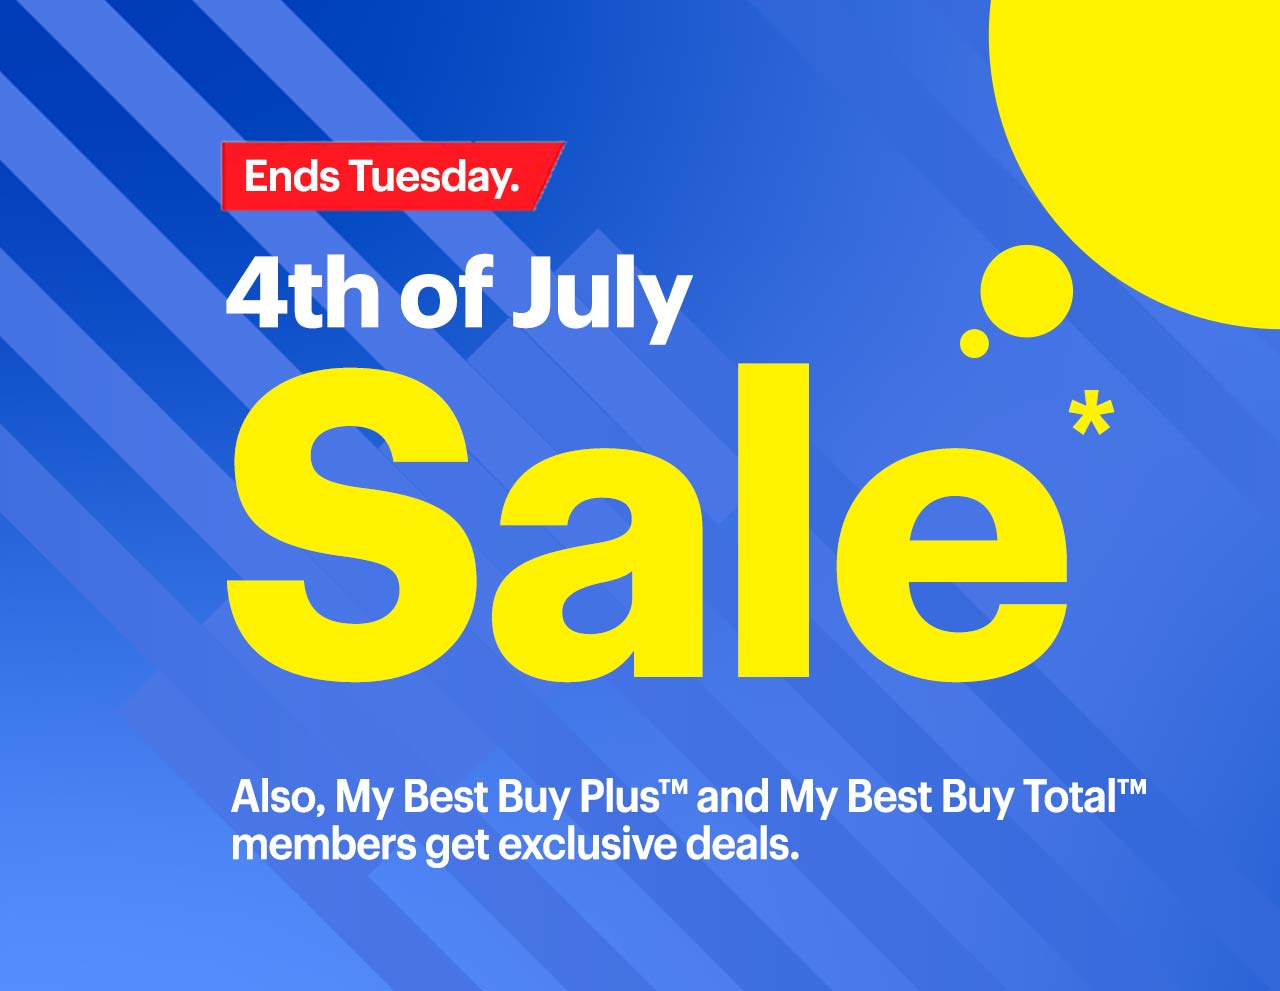 4th of July Sale ends Tuesday. Select members save more. Reference disclaimer.